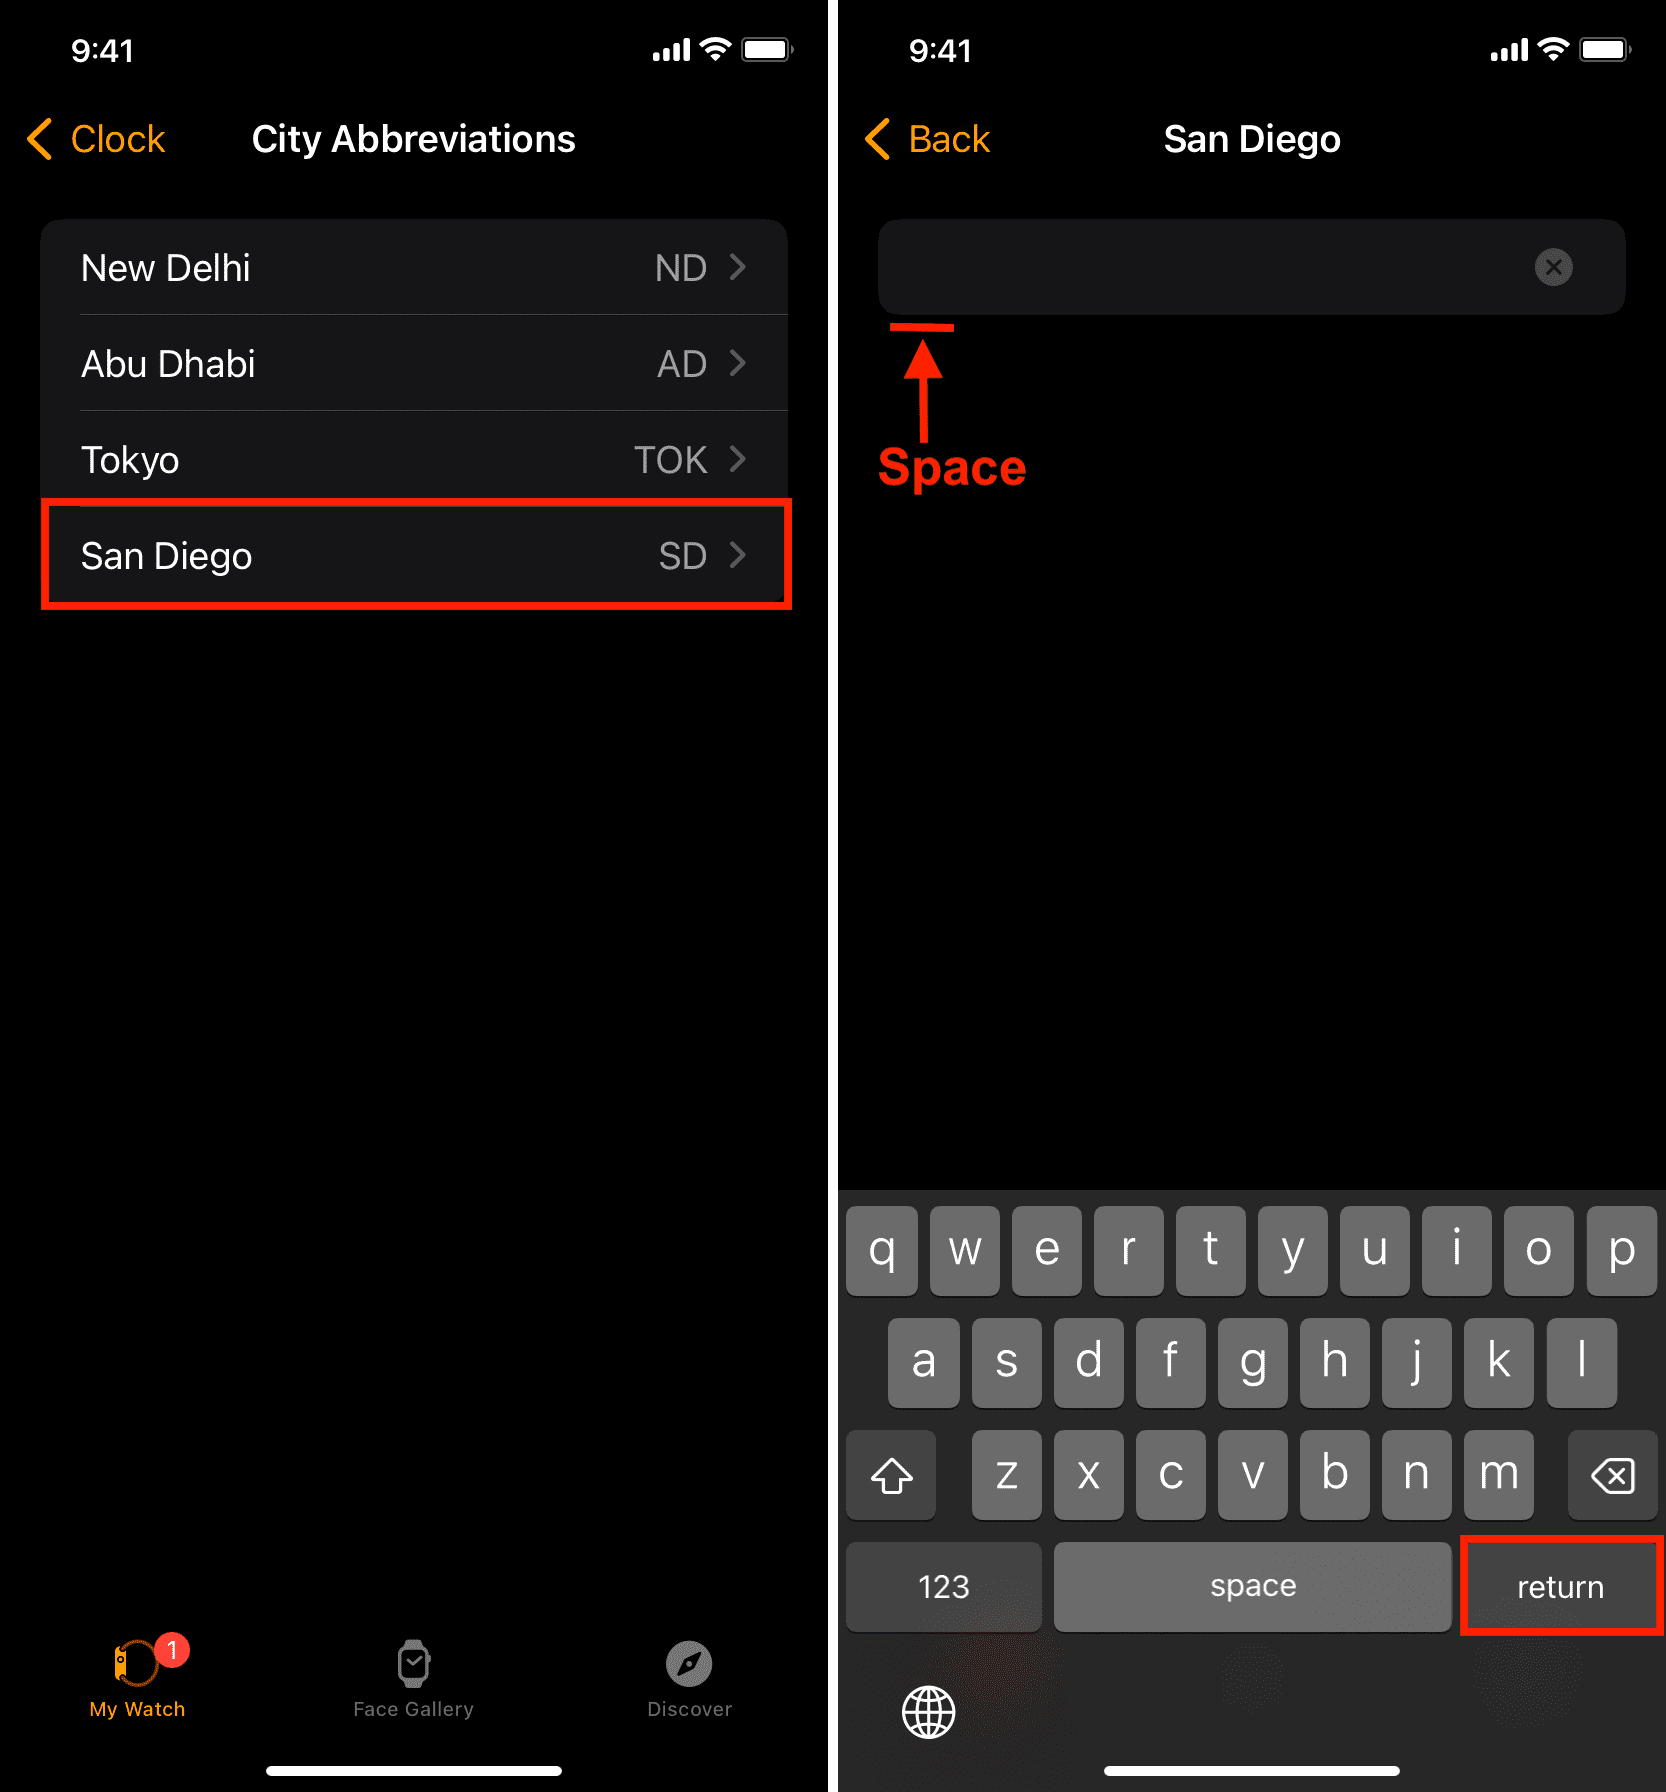 Use space as city name in City Abbreviations settings of Watch app